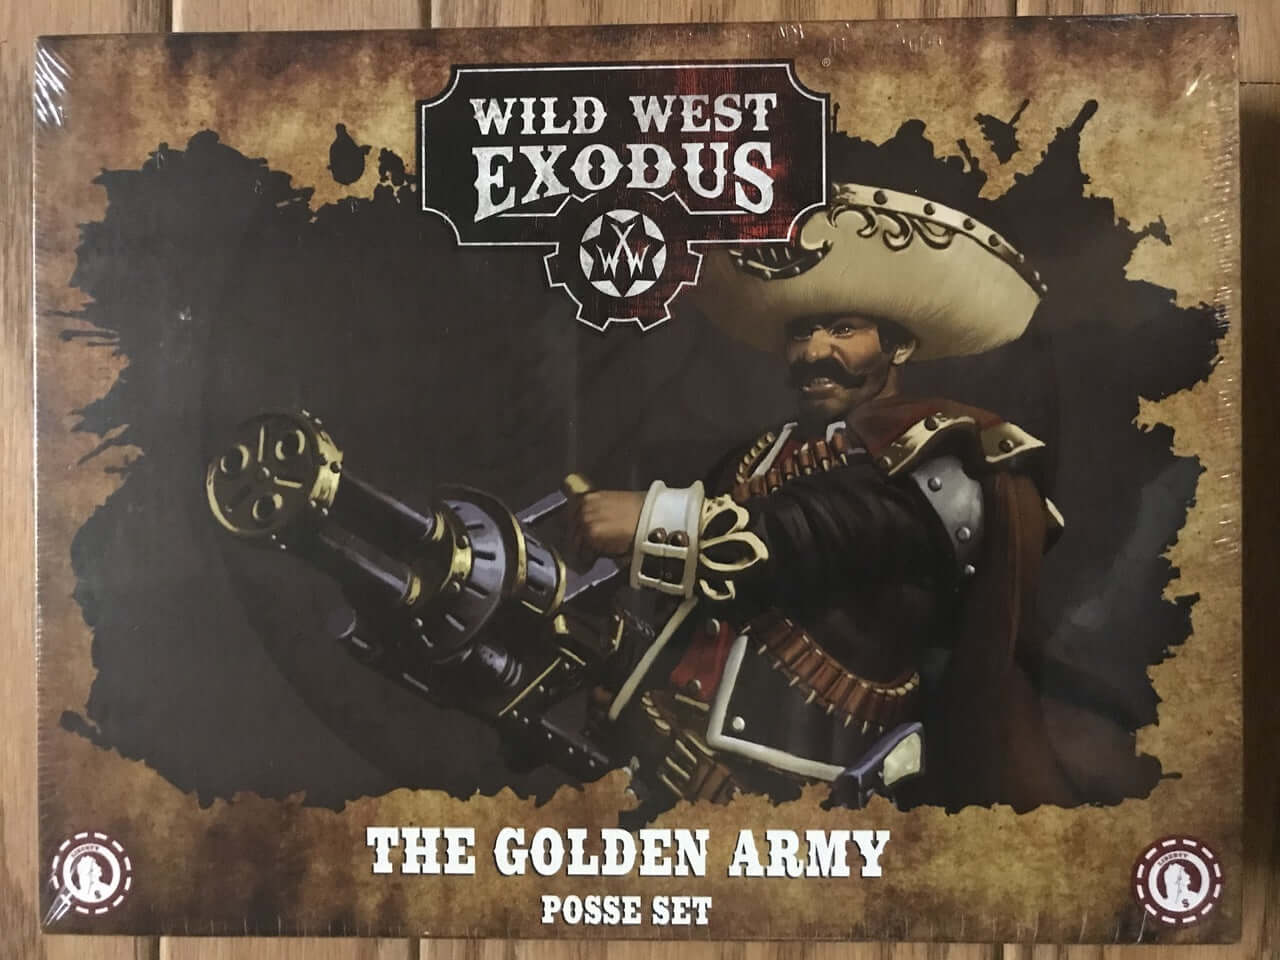 Clearance The Golden Army Posse Wild West Exodus